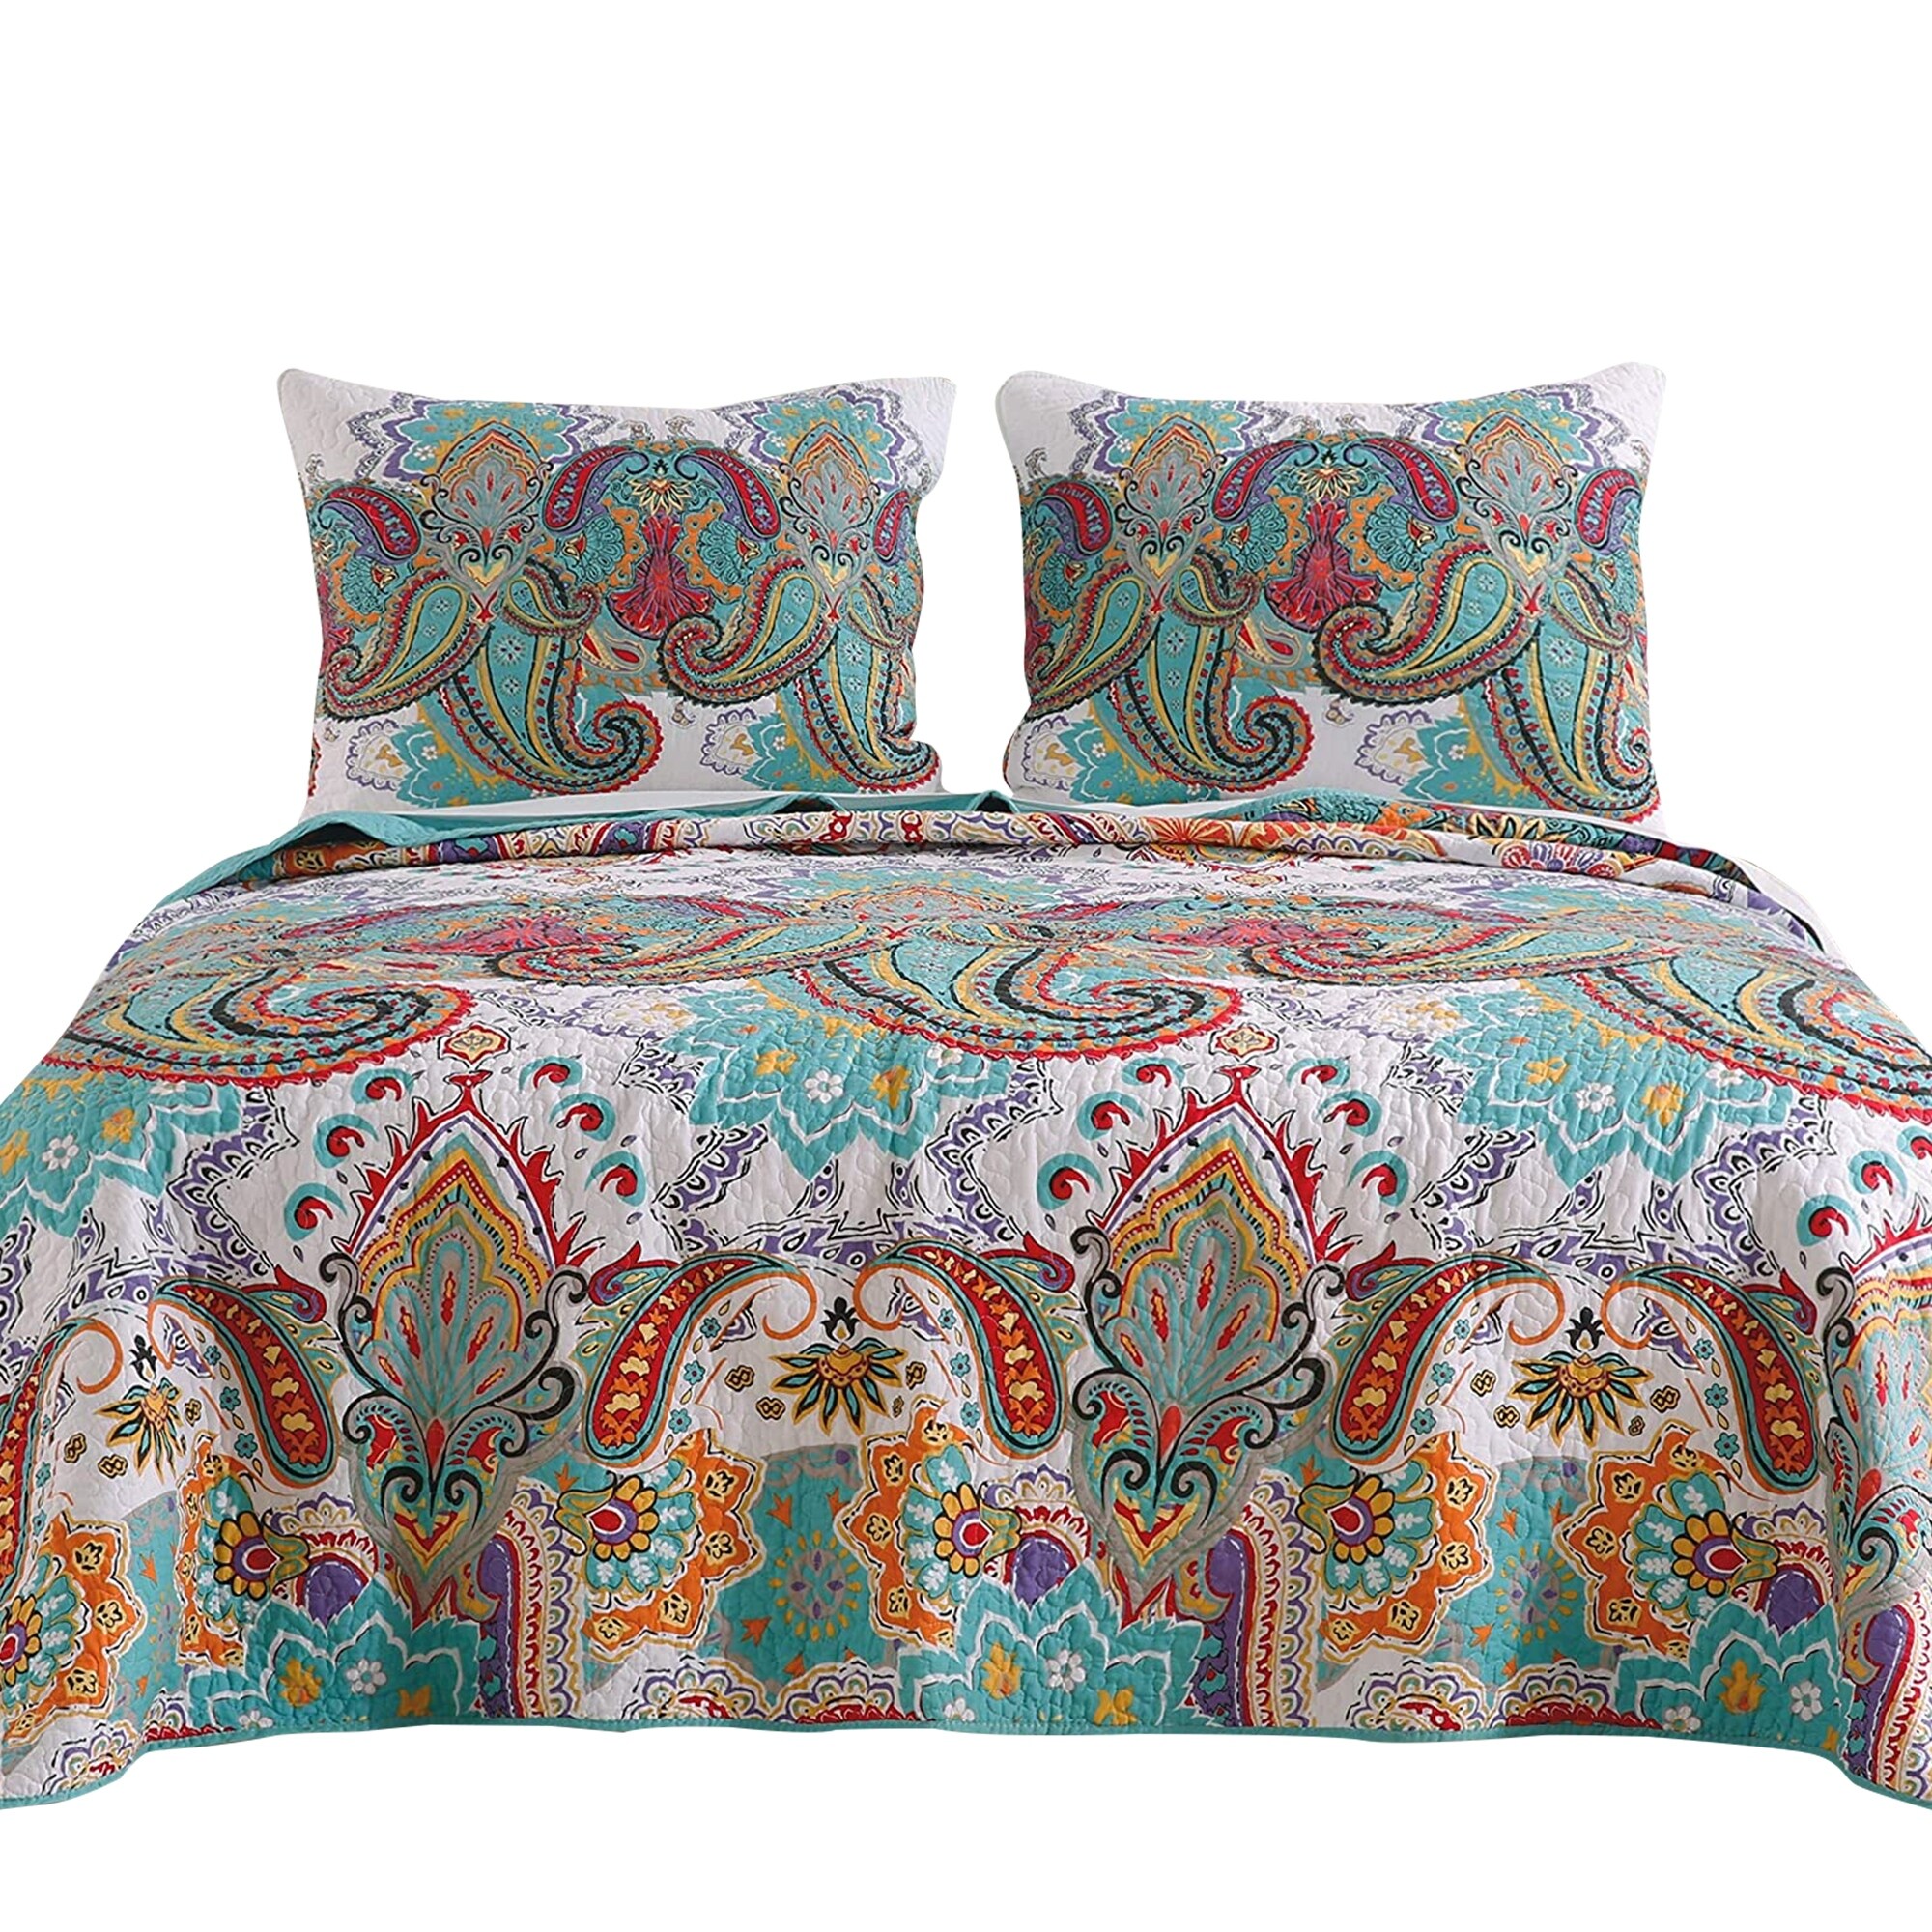 Teal White Paisley Printed Reversible Cotton Quilted Throw 